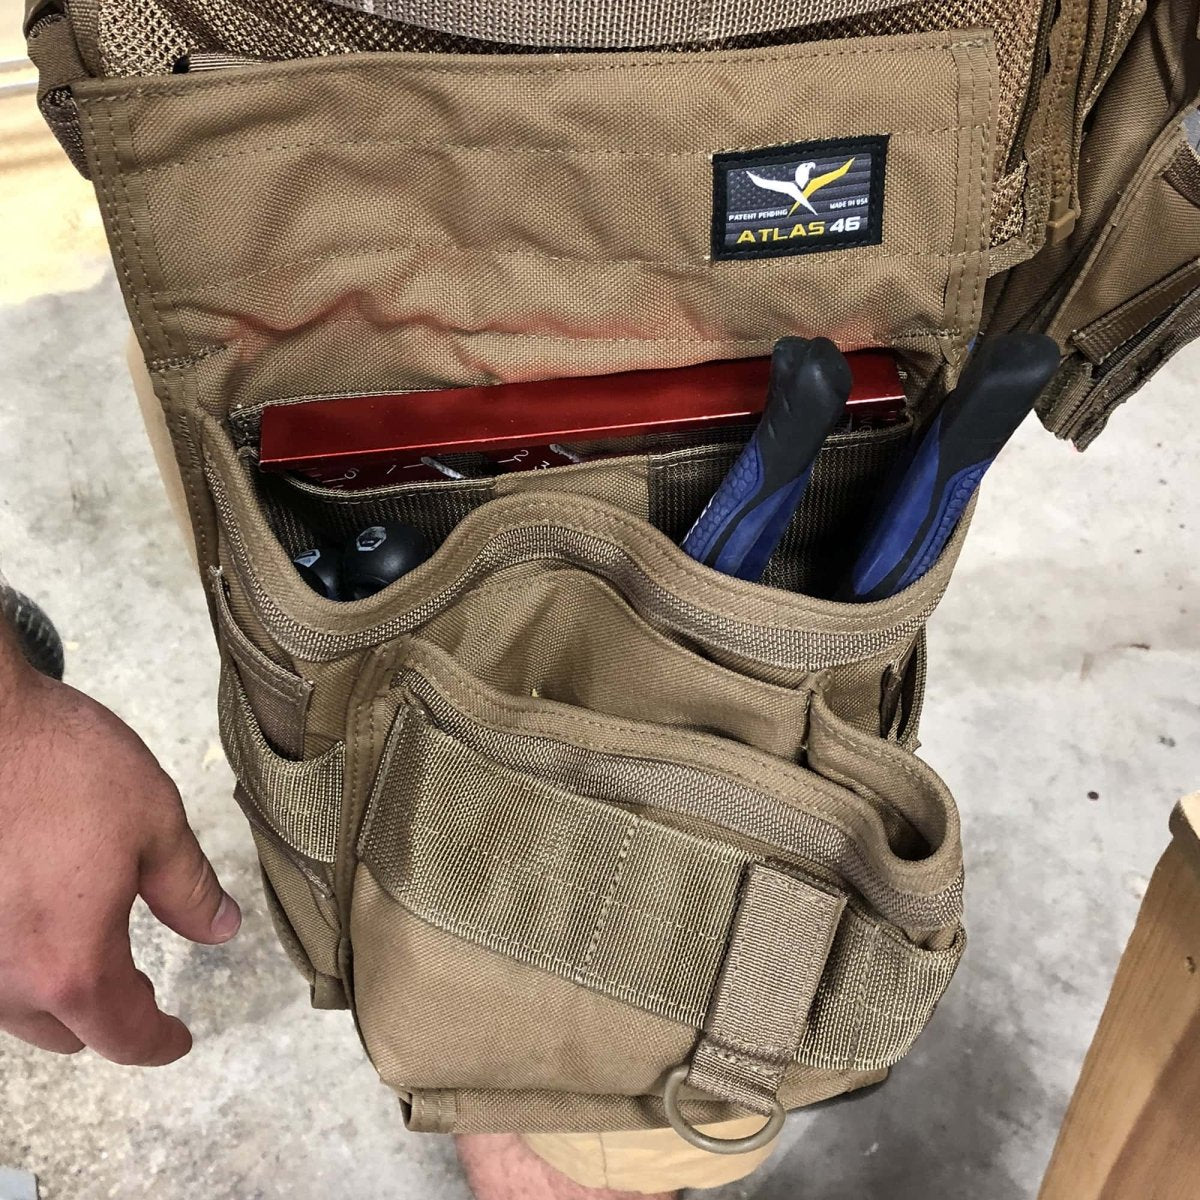 Atlas 46 AIMS Screw and Nail Attachment Pouch v2 A247 Gear